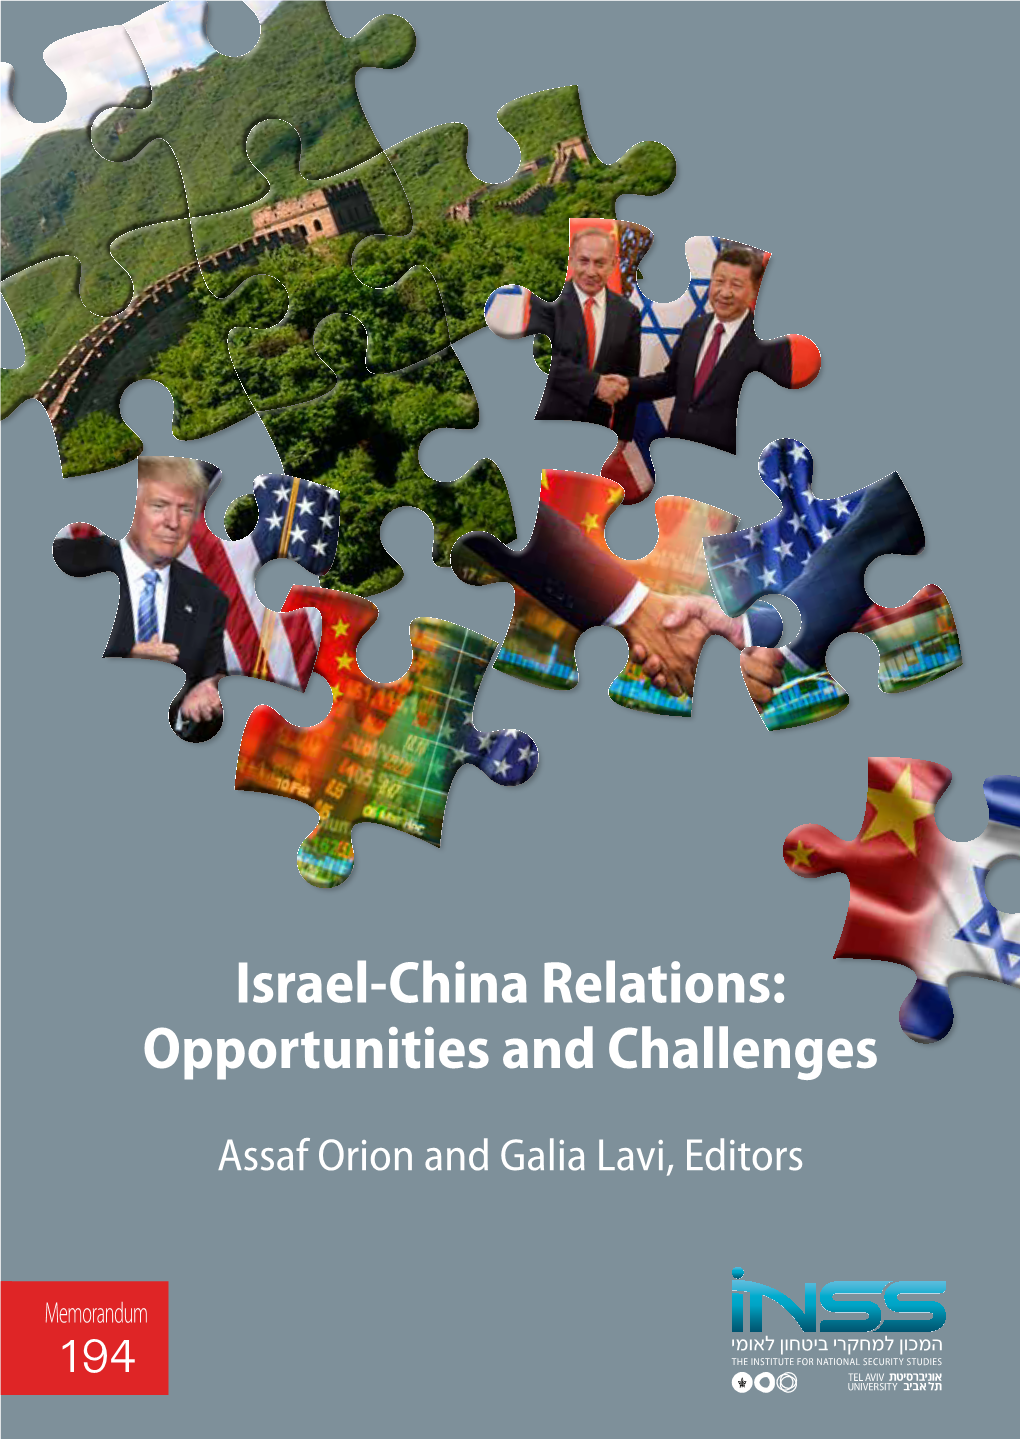 Israel-China Relations: Opportunities and Challenges